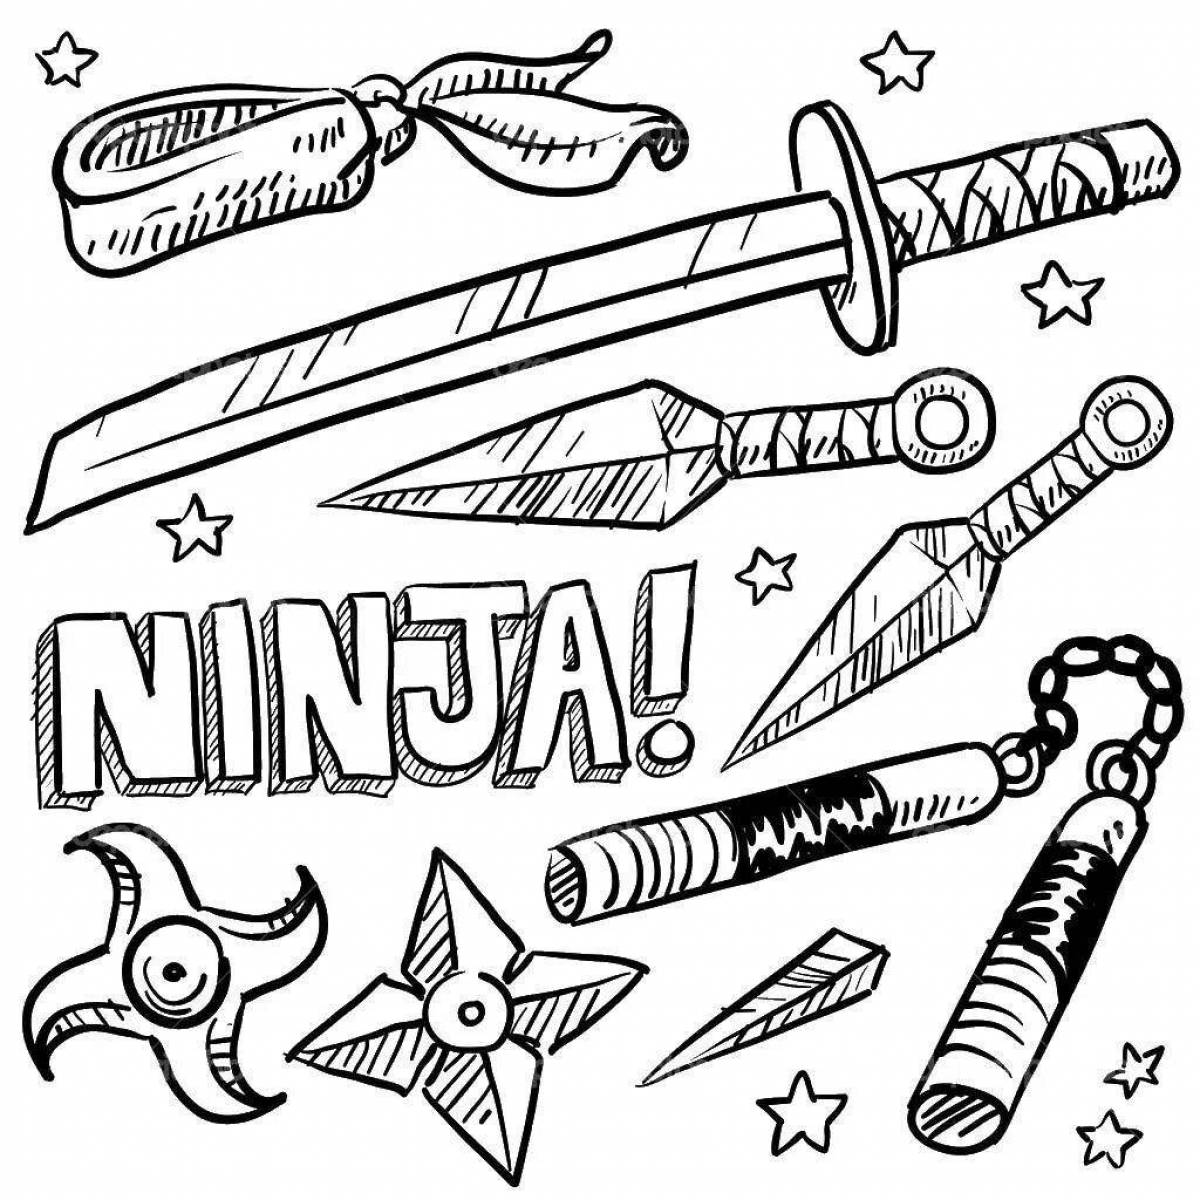 Gorgeous laser sword coloring page